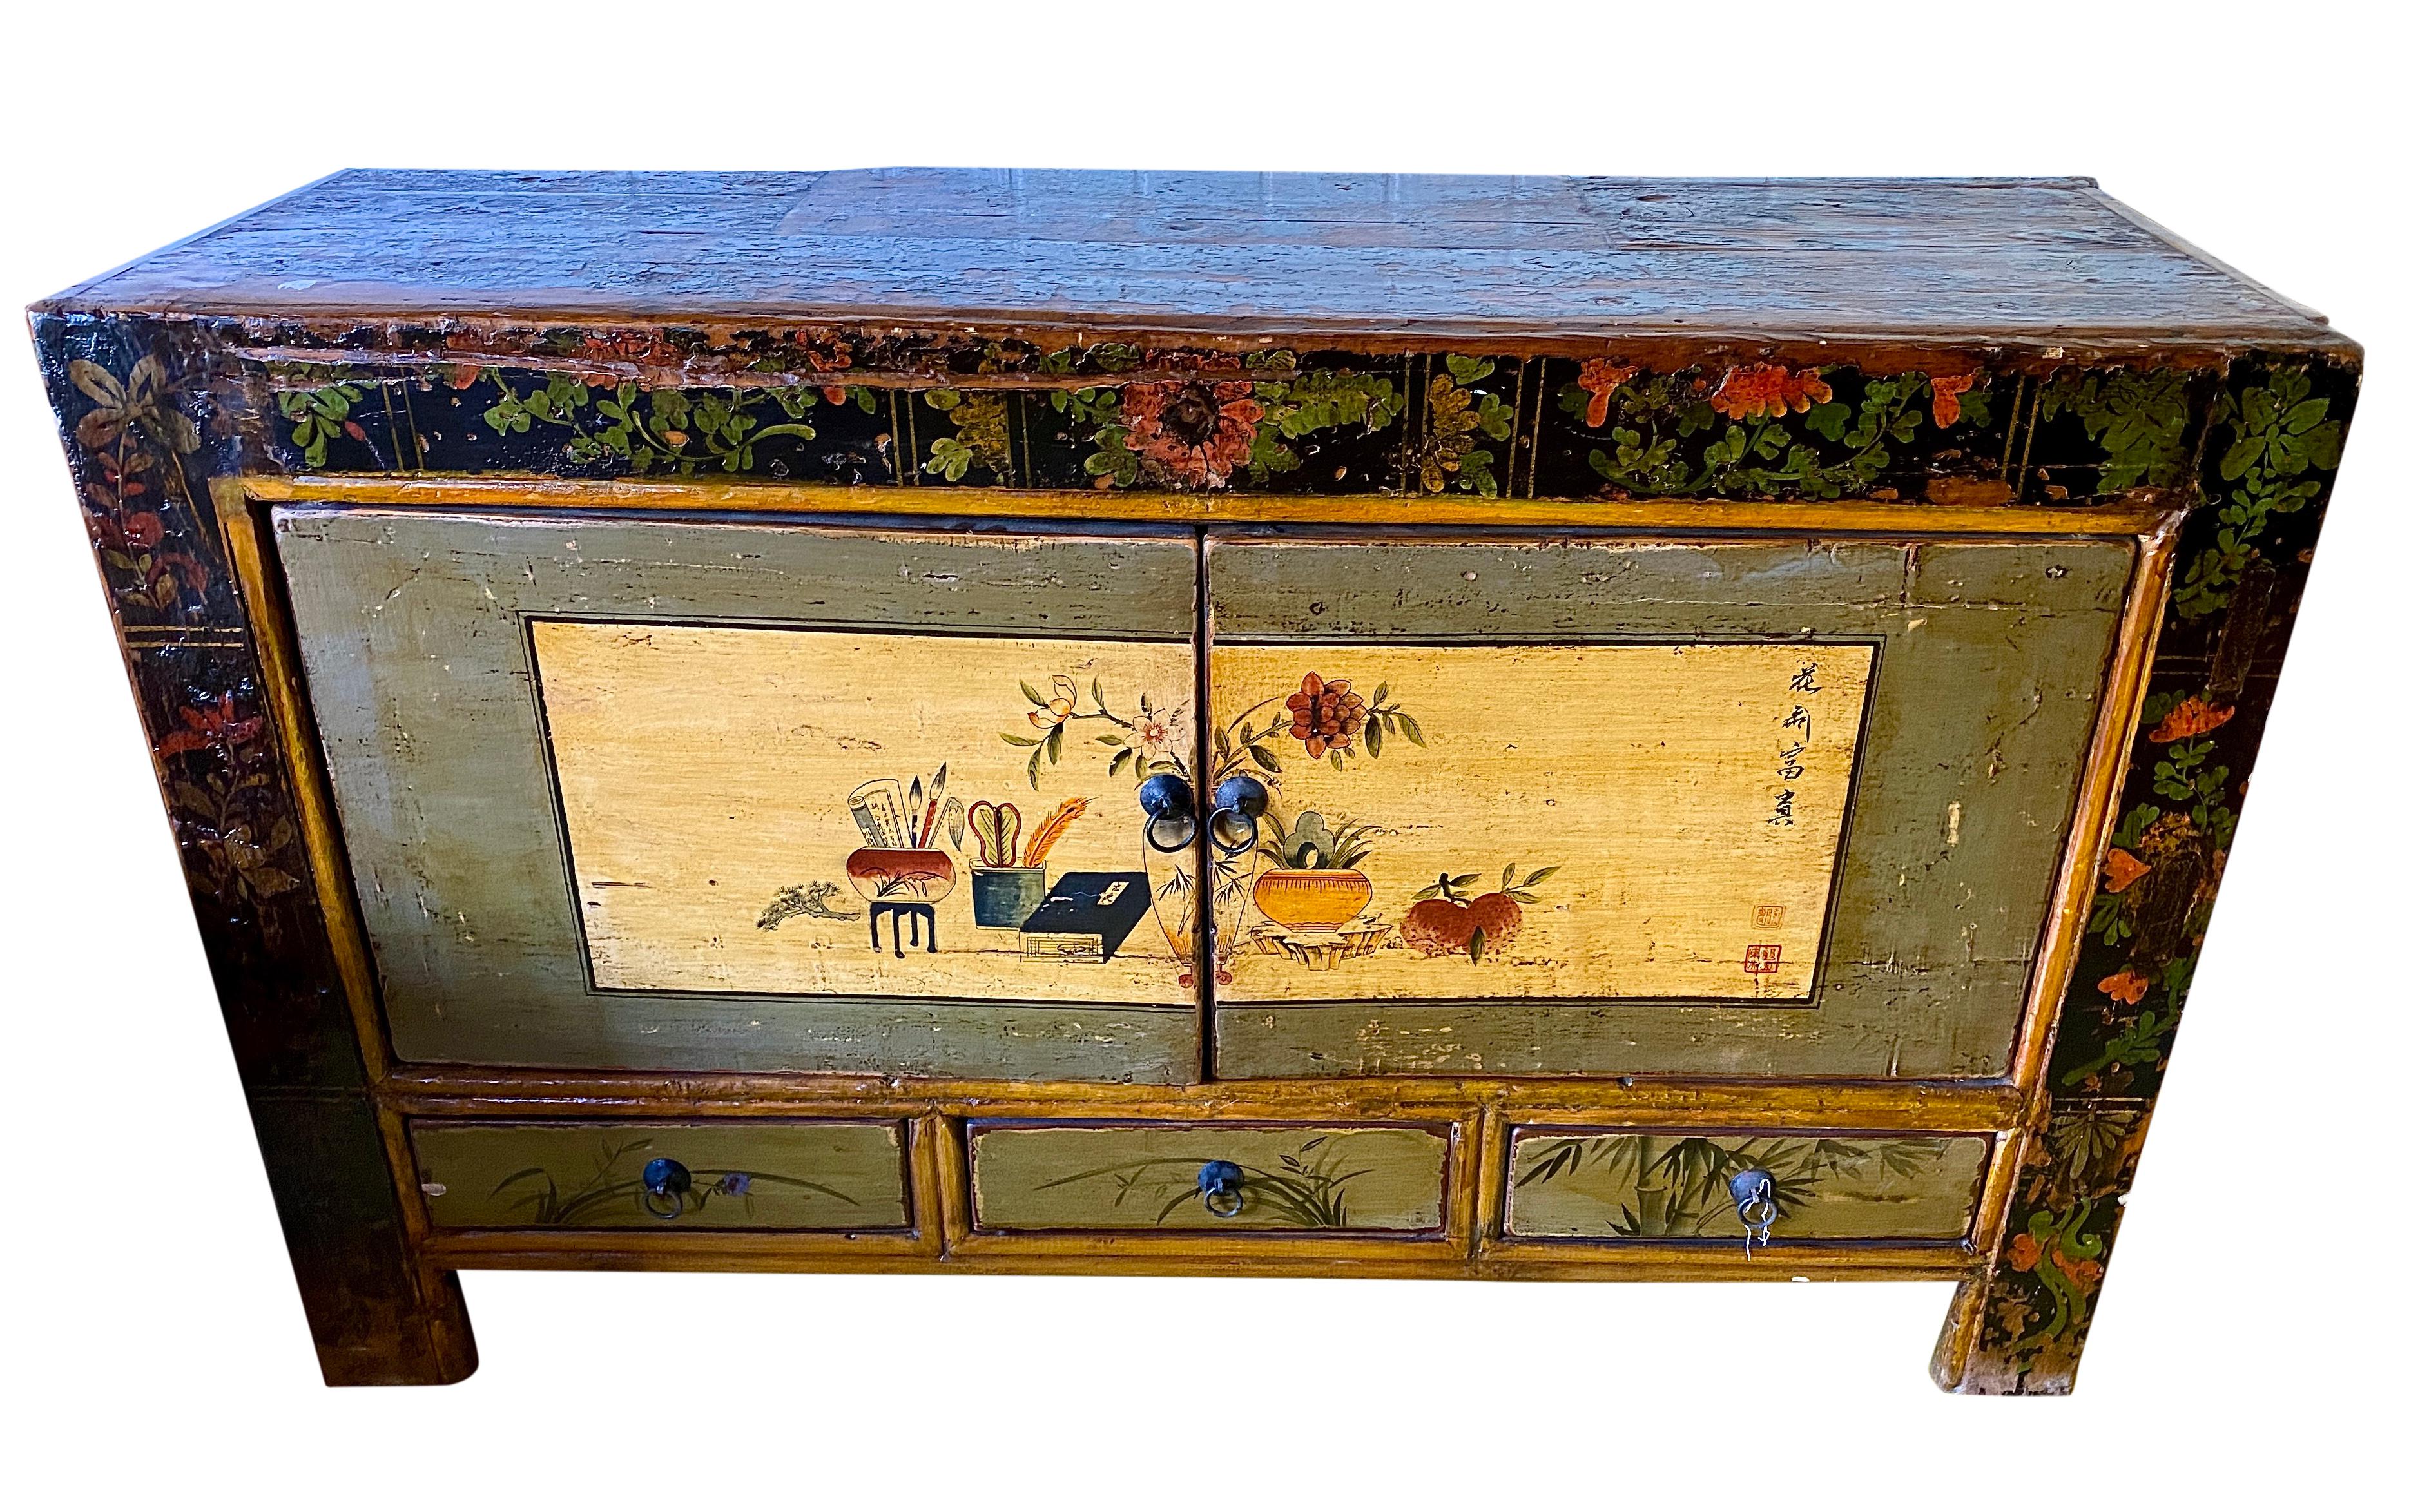 This 19th century vintage Mongolian hand painted cabinet features 2 doors opening to reveal two shelves with storage capacity. A great statement piece filled with art and history for the collector and the perfect home accent. The sideboard features